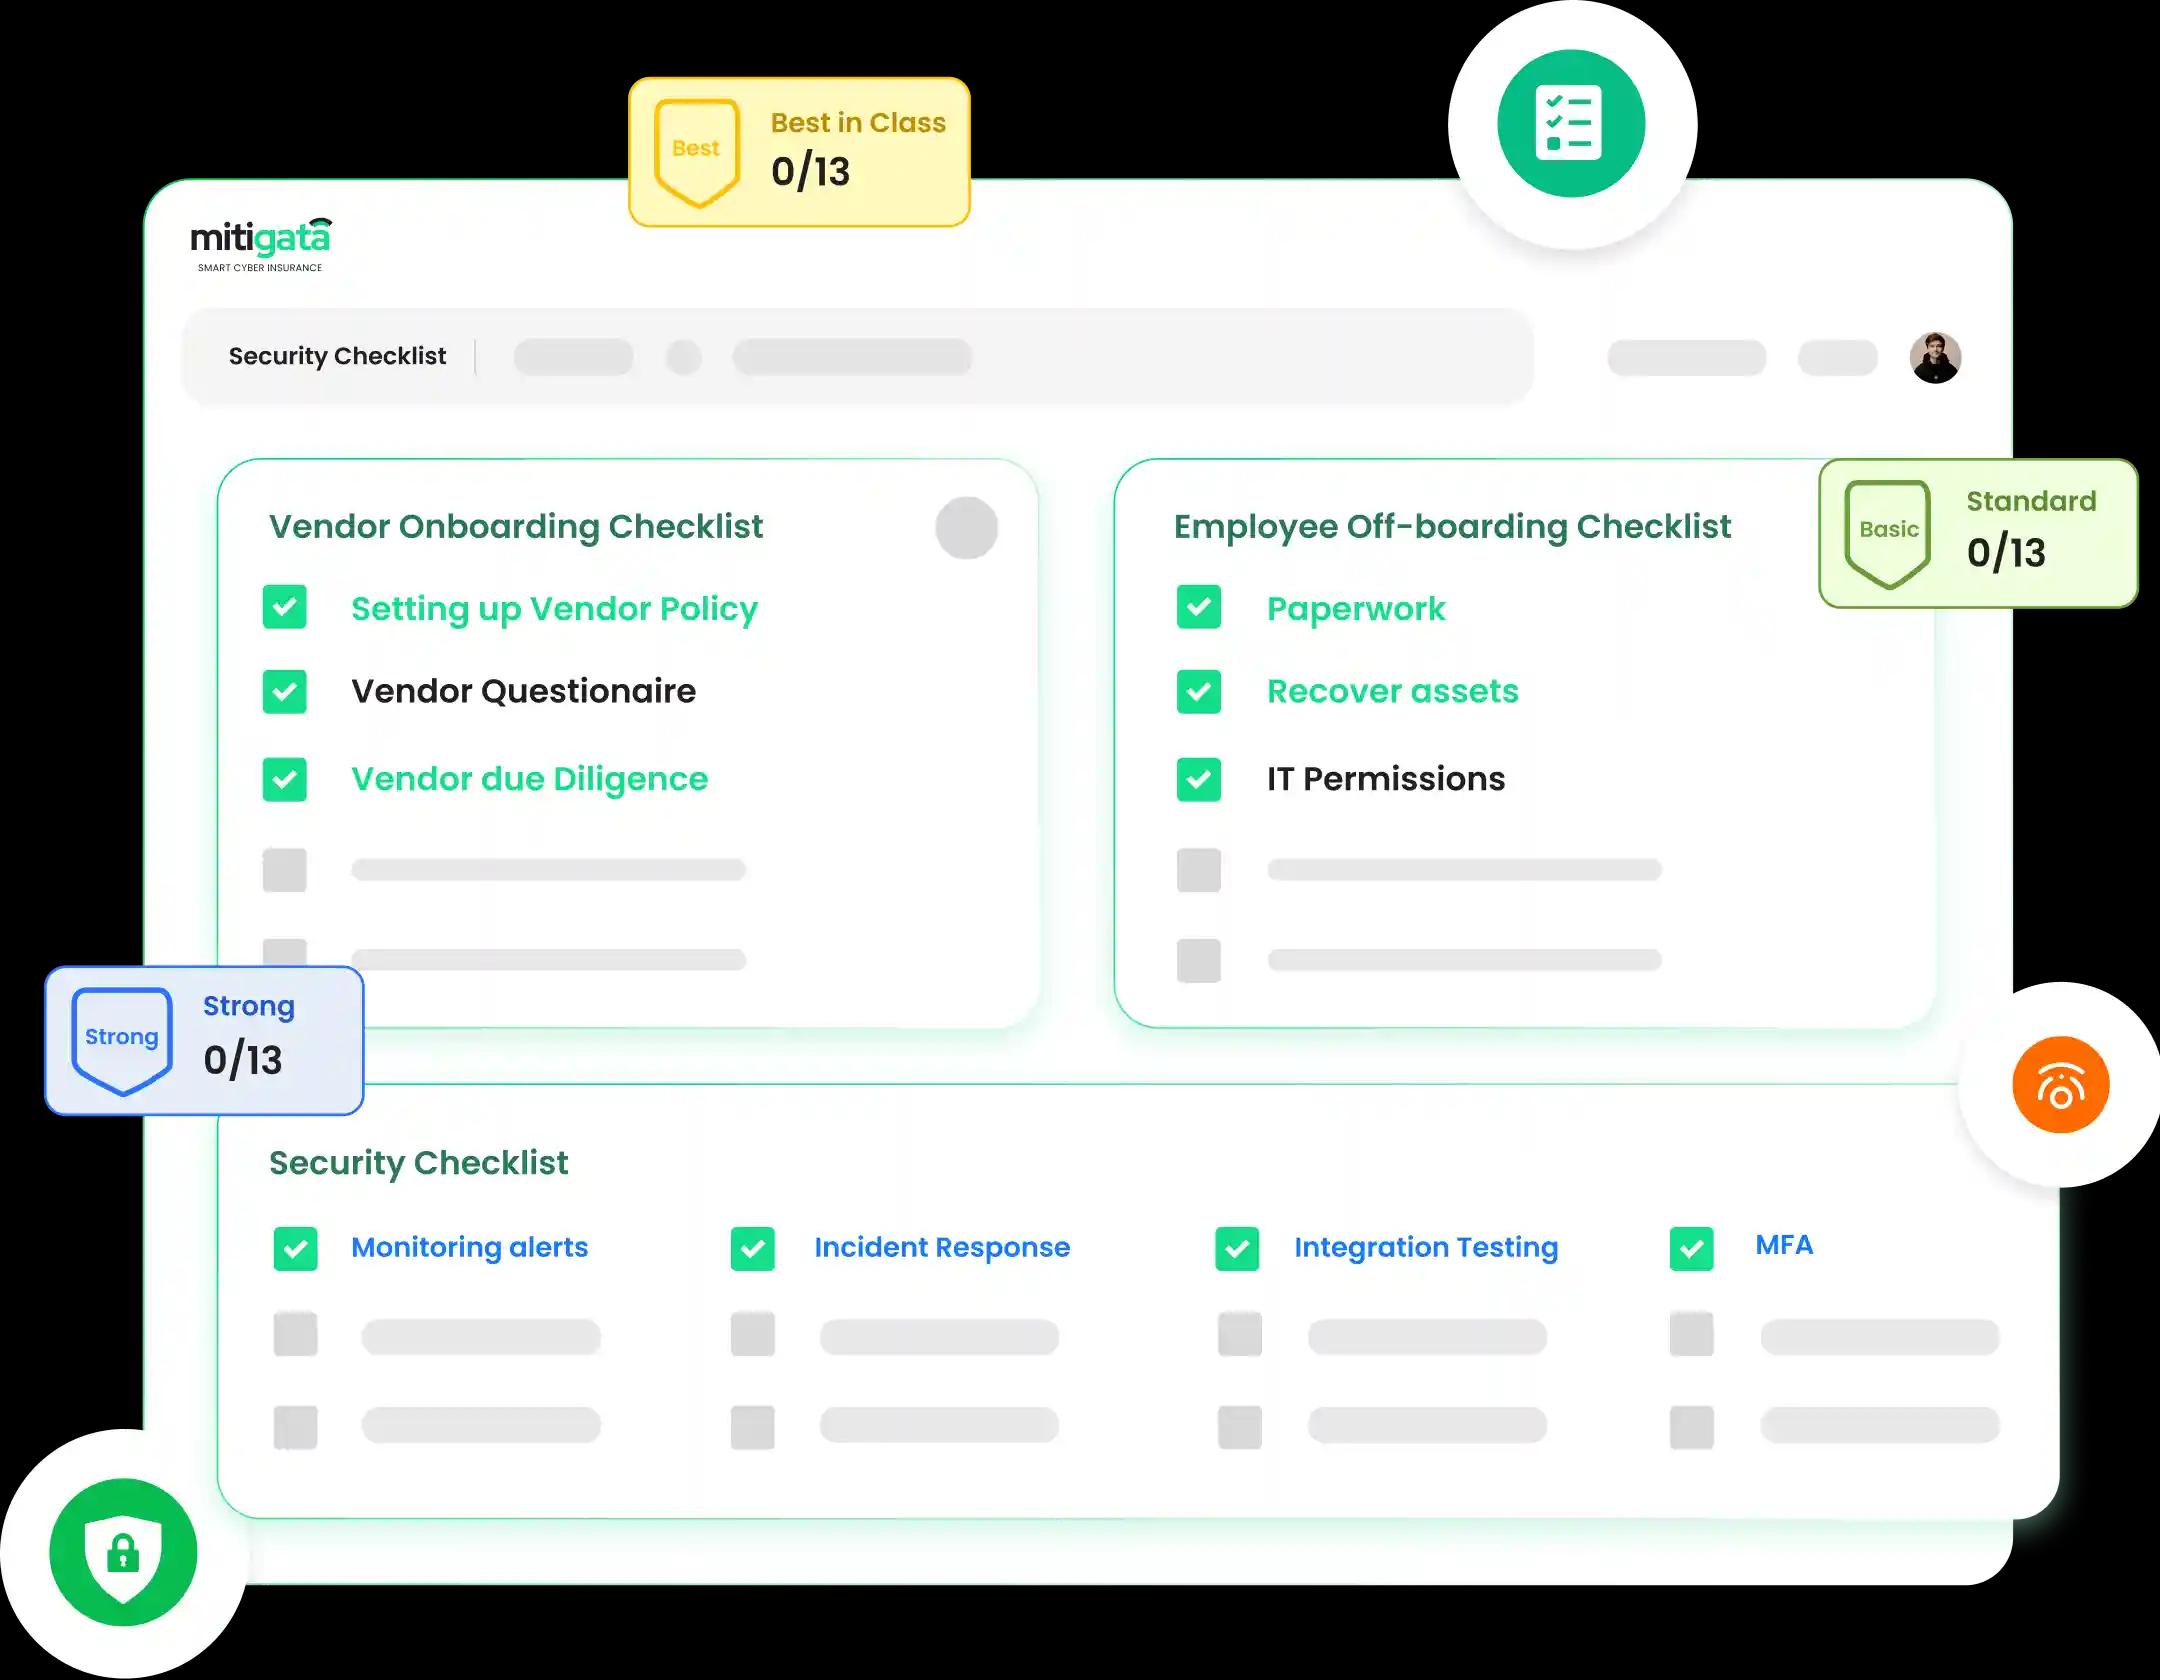  A dashboard displaying categorised tasks for vendor onboarding and employee off-boarding within a secure digital environment, highlighted by strong and best in class progress trackers.